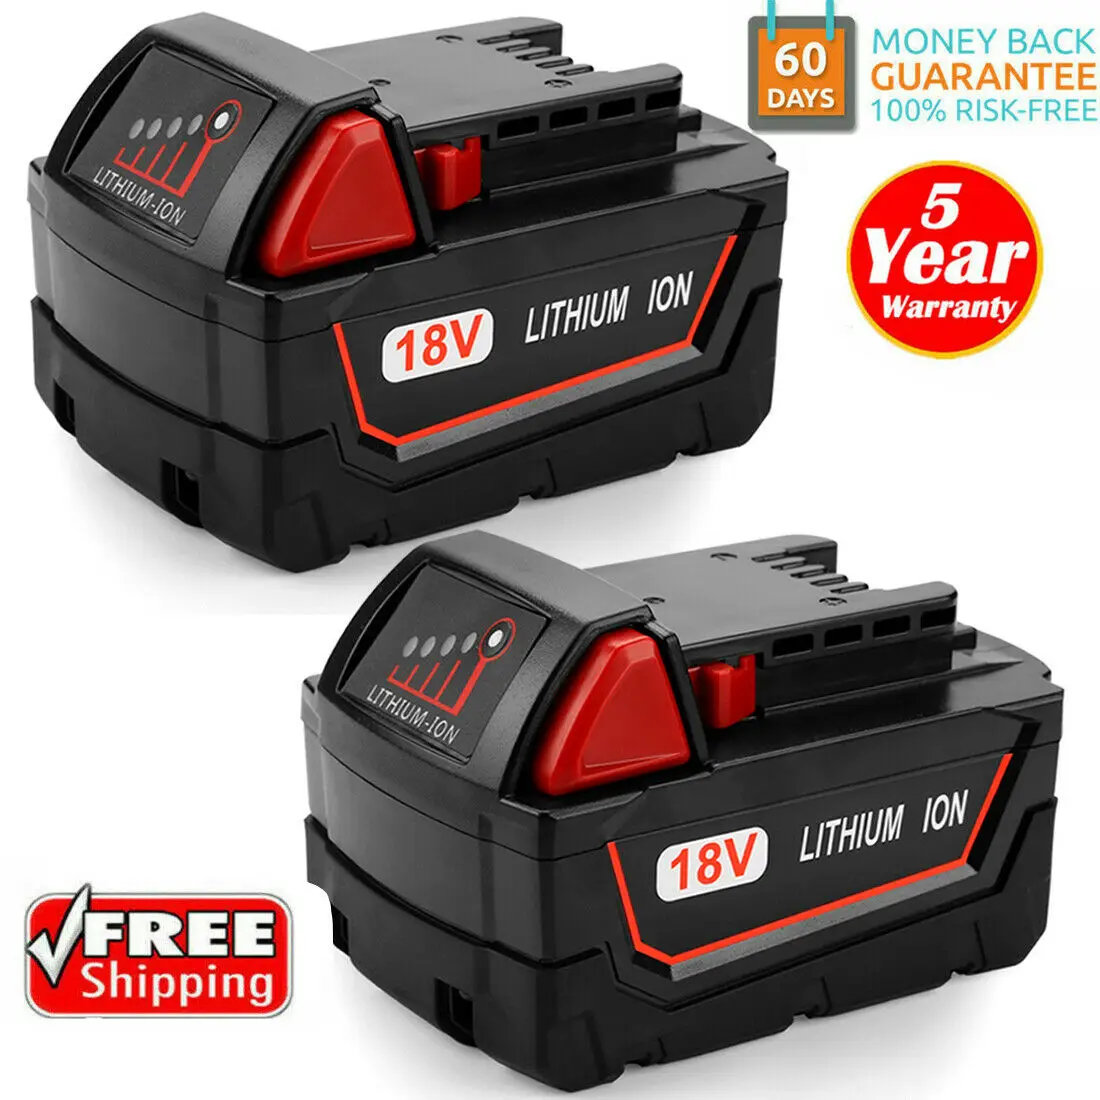 

Milwaukee 48-11-1852 M18 REDLITHIUM XC 9.0Ah Extended Capacity Battery for Milwaukee 48-11-1850 48-11-1840 Cordless Power Tools